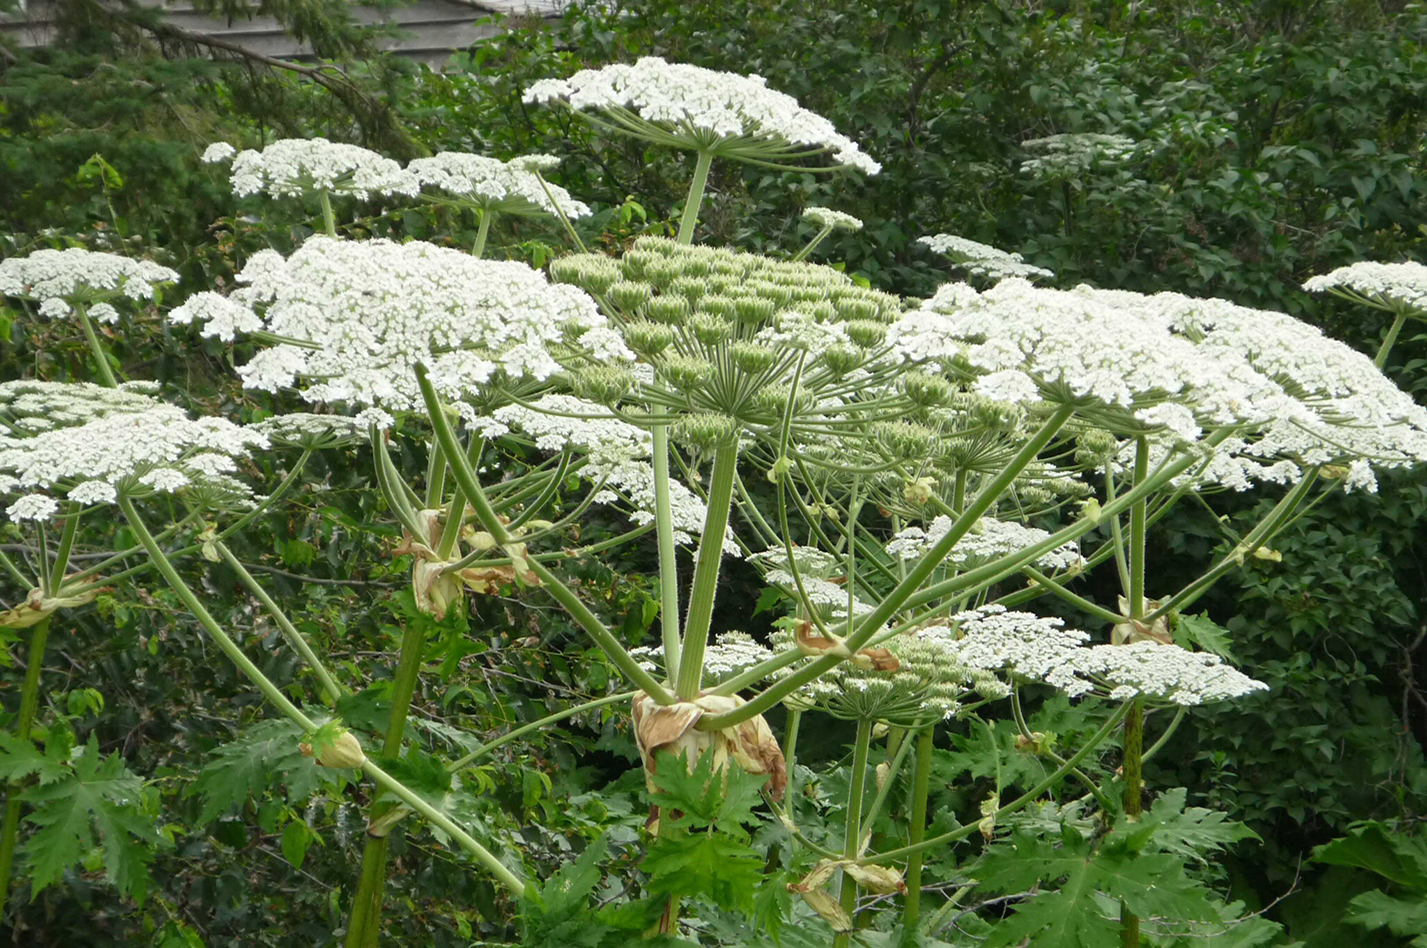 Giant Hogweed - Photo by OFAH